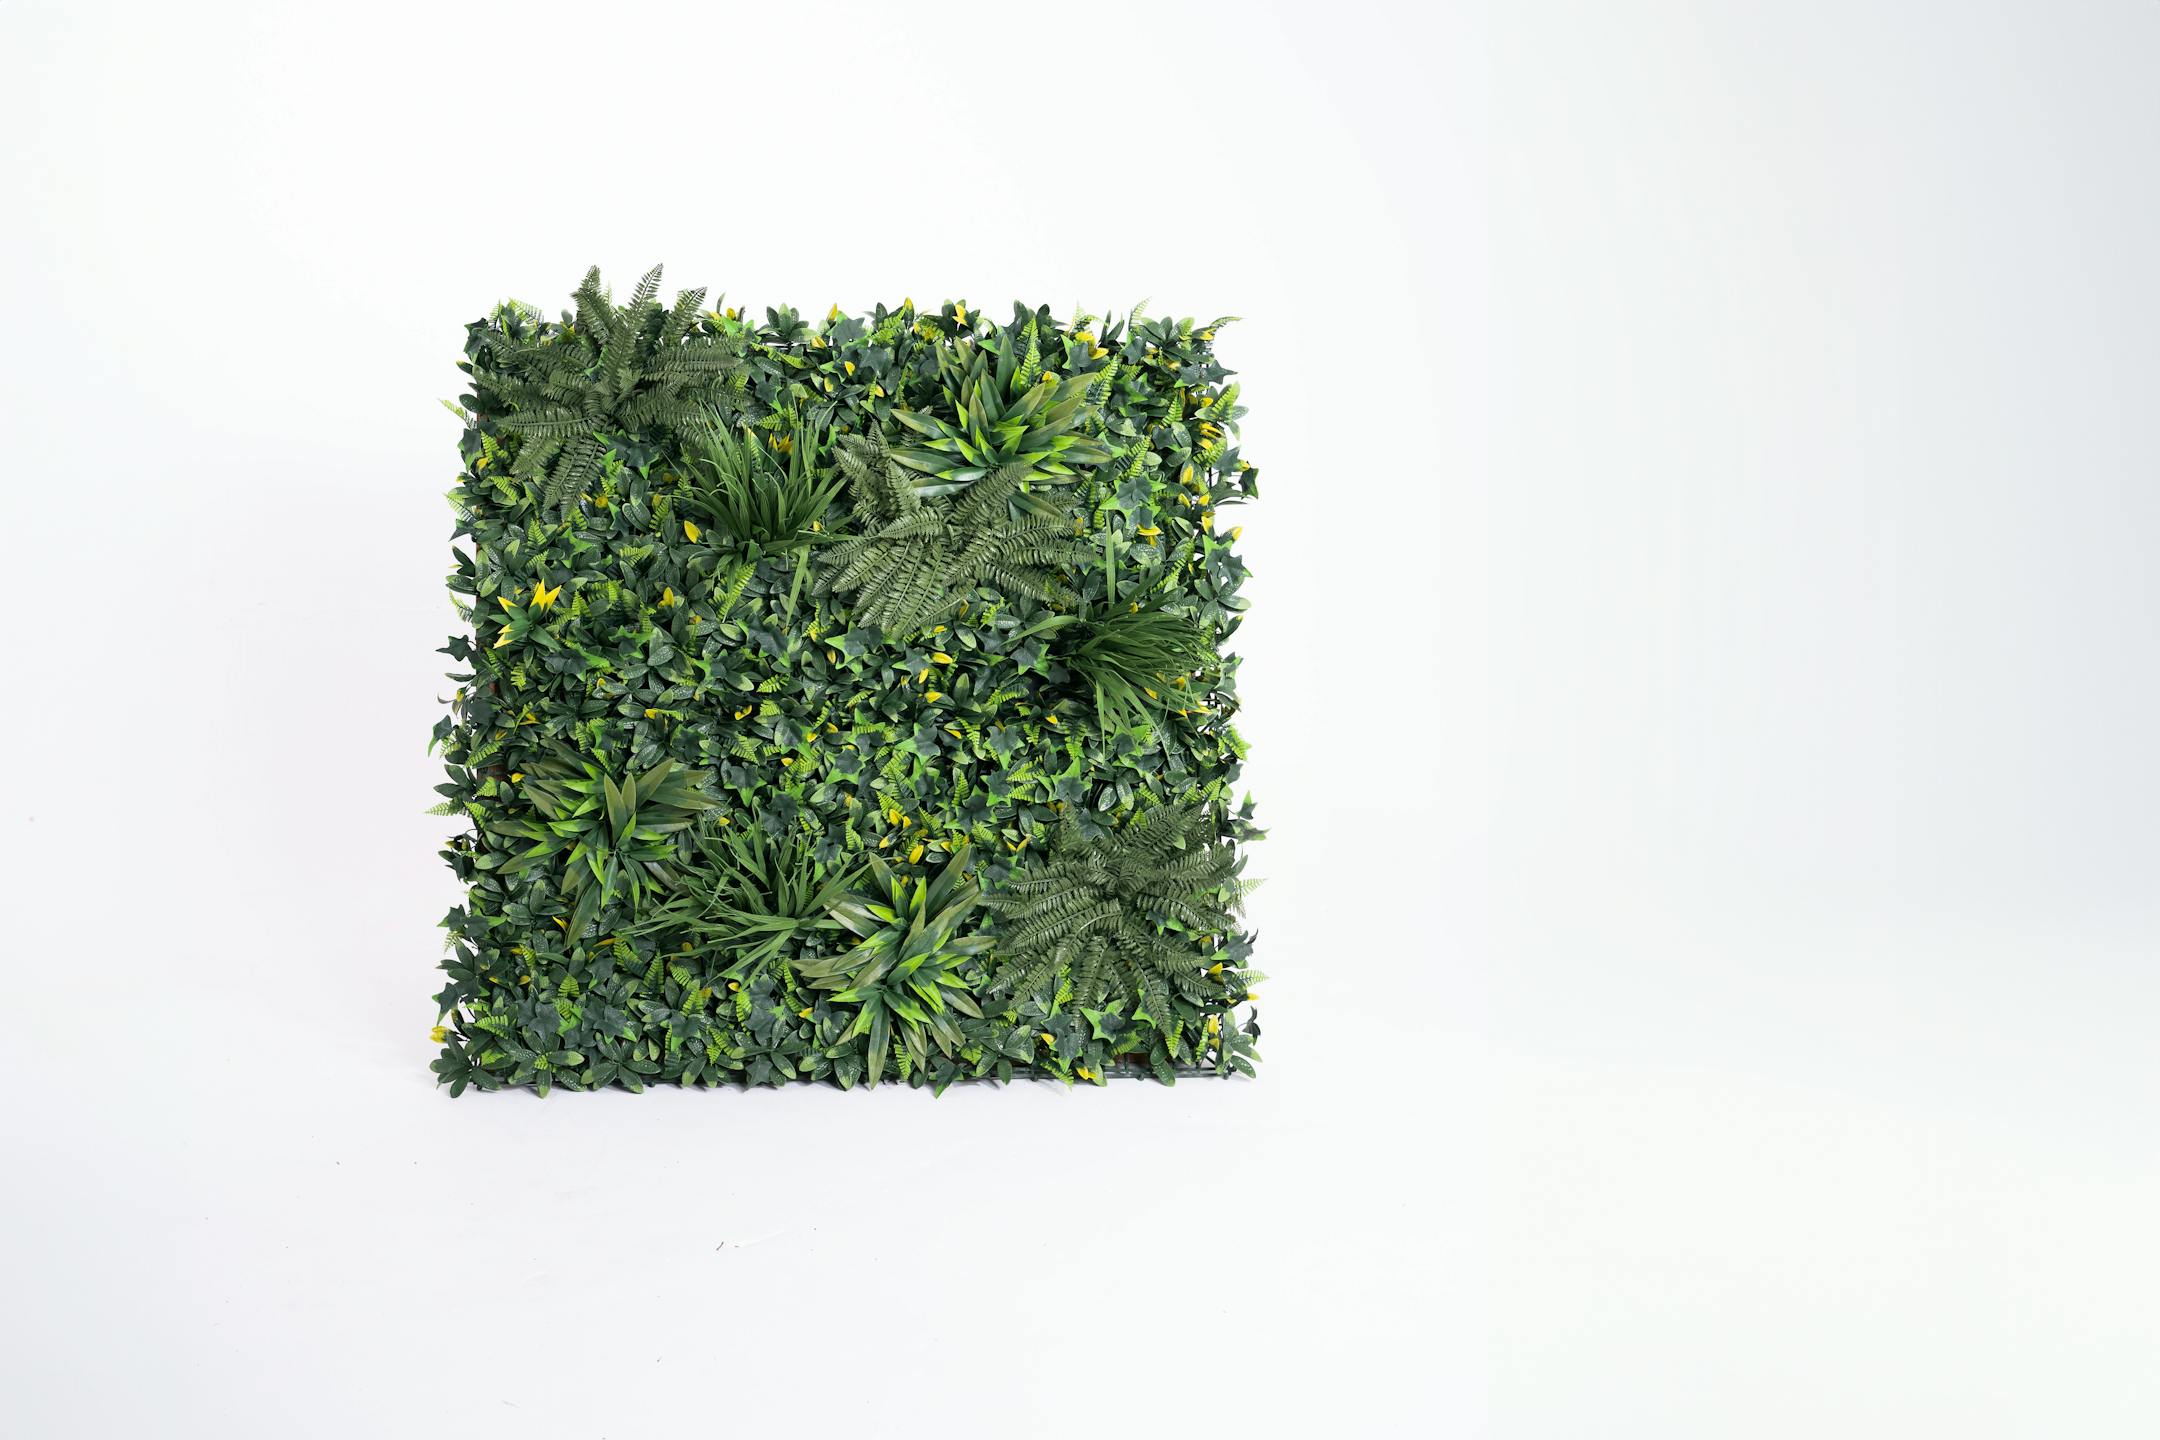 Faux forest greens living wall mat